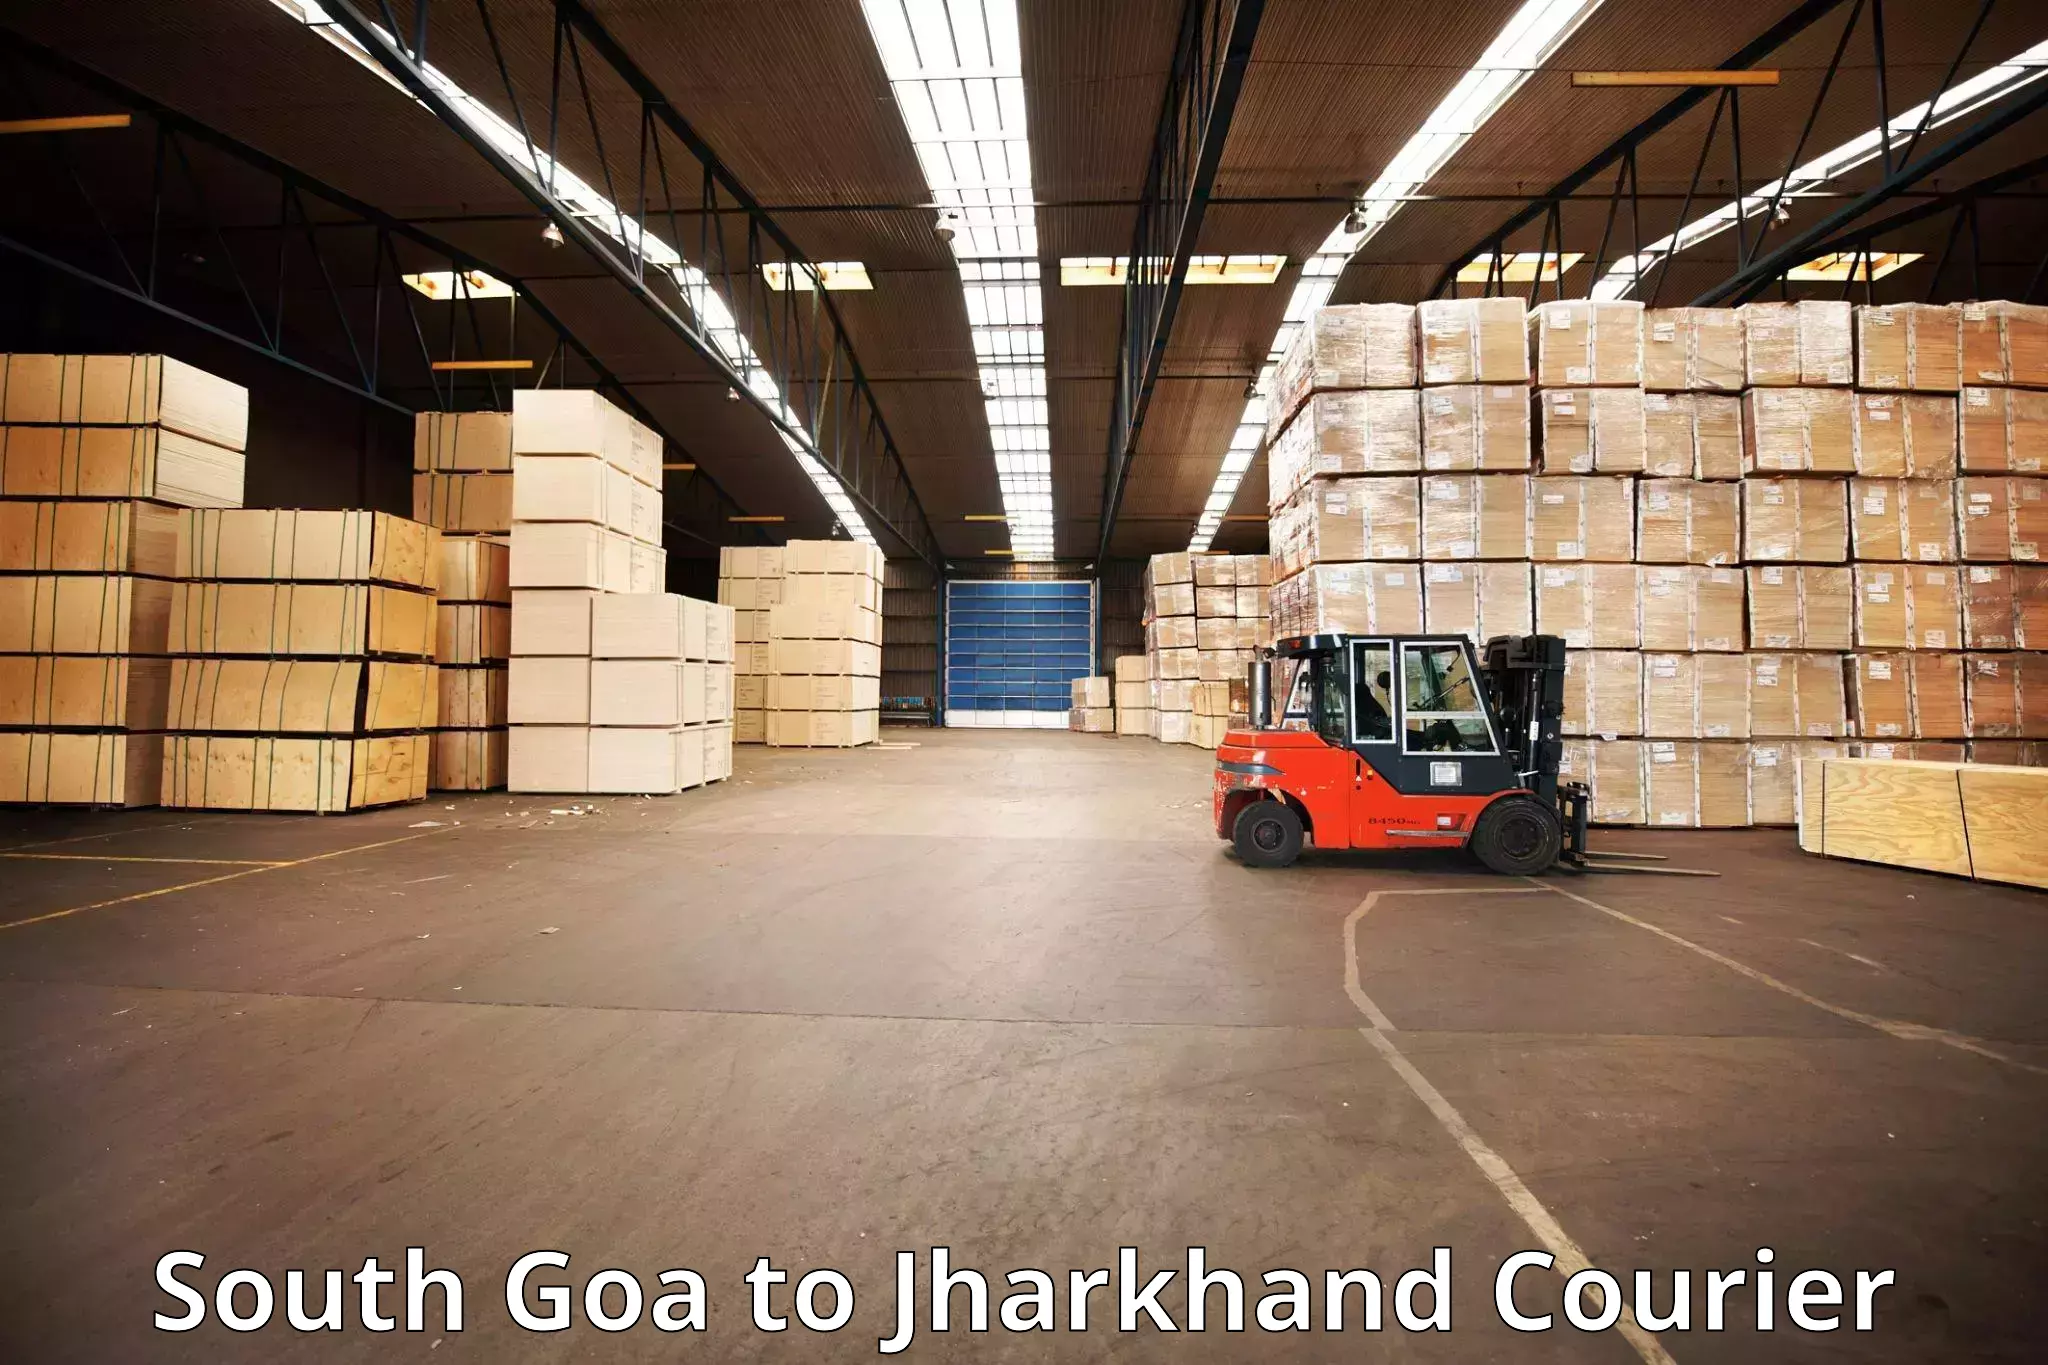 Baggage transport network in South Goa to Dhanbad